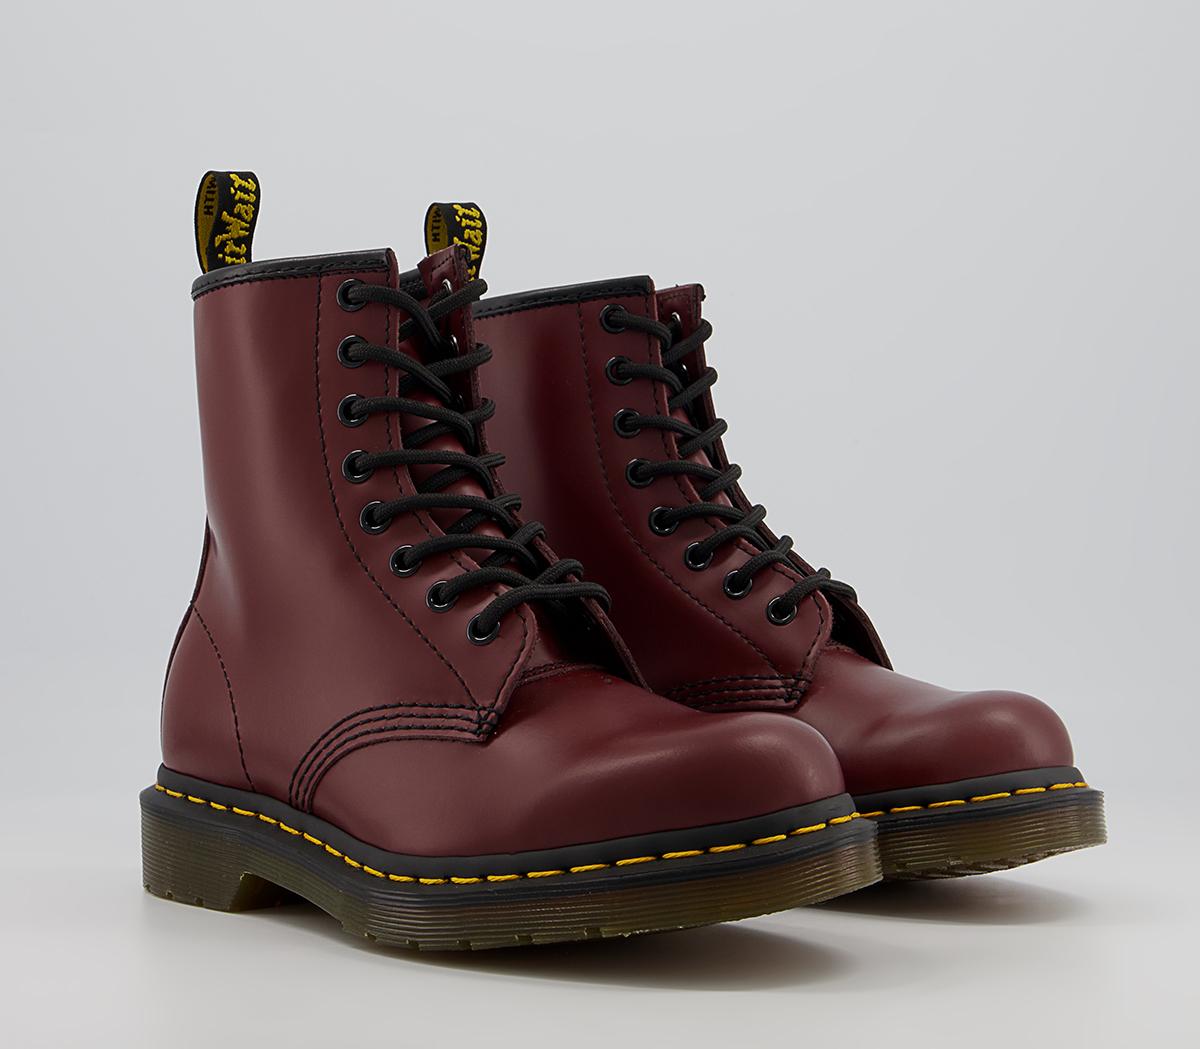 Dr. Martens 8 Eyelet Lace Up Boots Cherry Red - Women's Ankle Boots